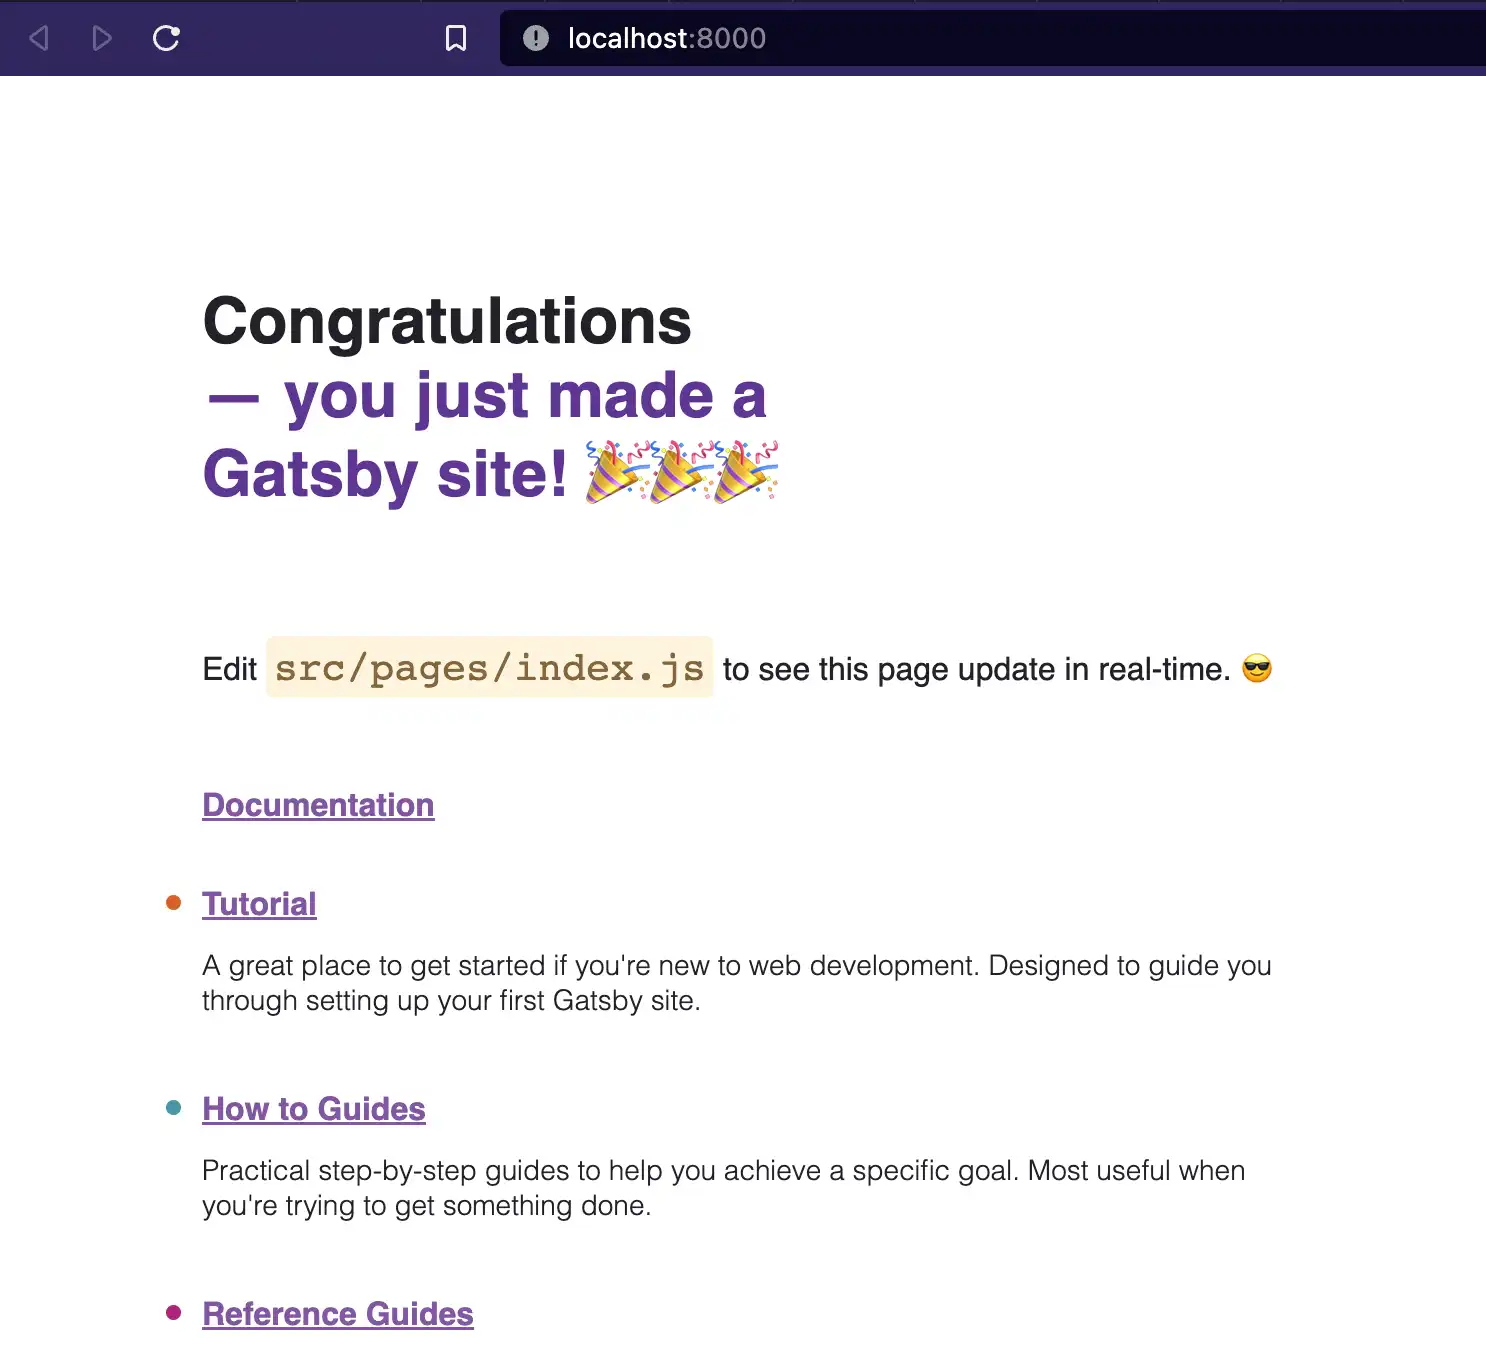 Congratulations you just made a Gatsby site